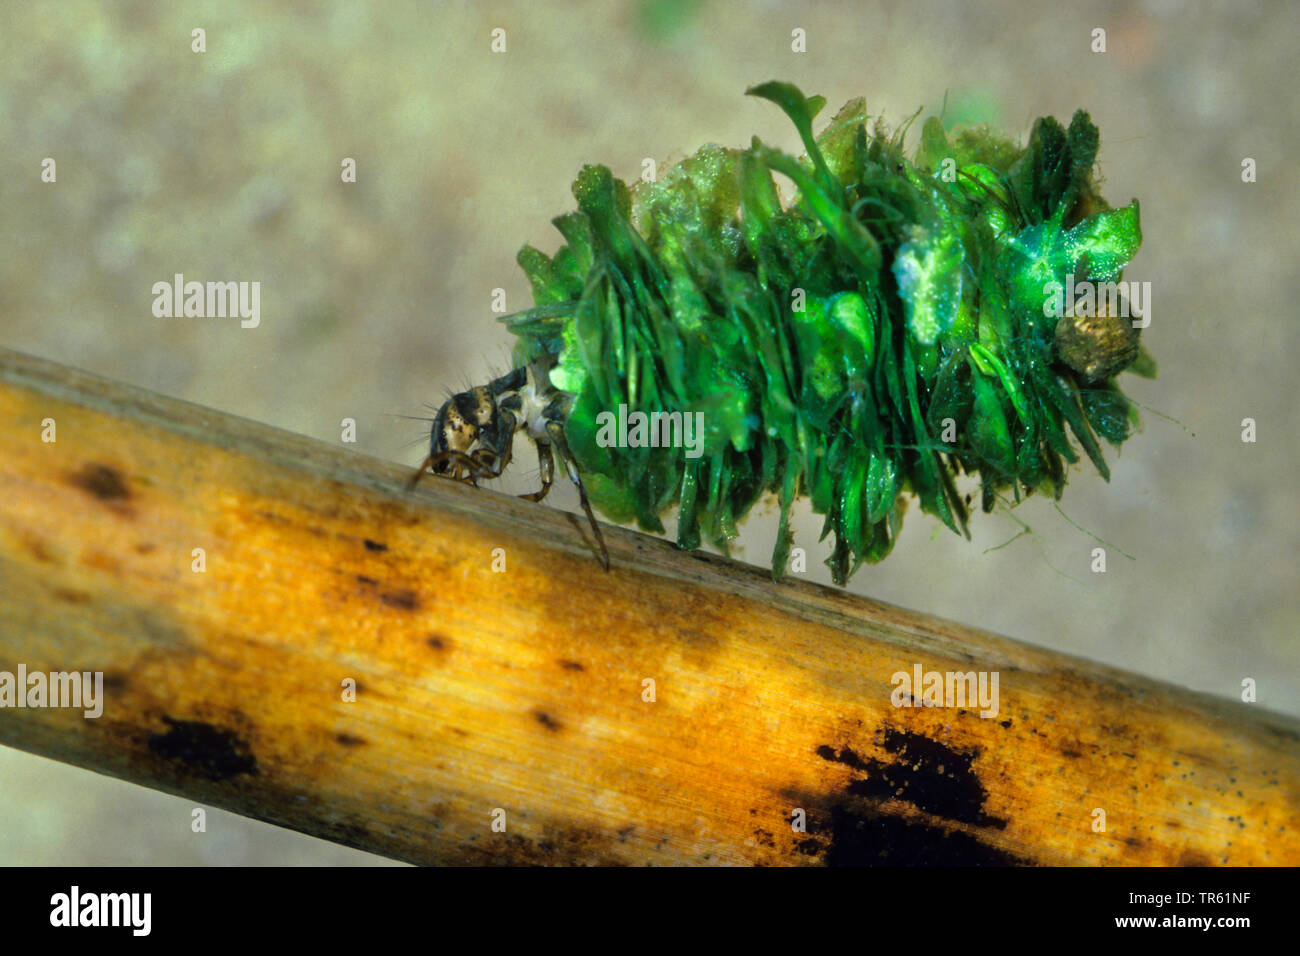 caddisfly (Limnophilus flavicornis), larva in its case made of plant particles, side view, Germany Stock Photo